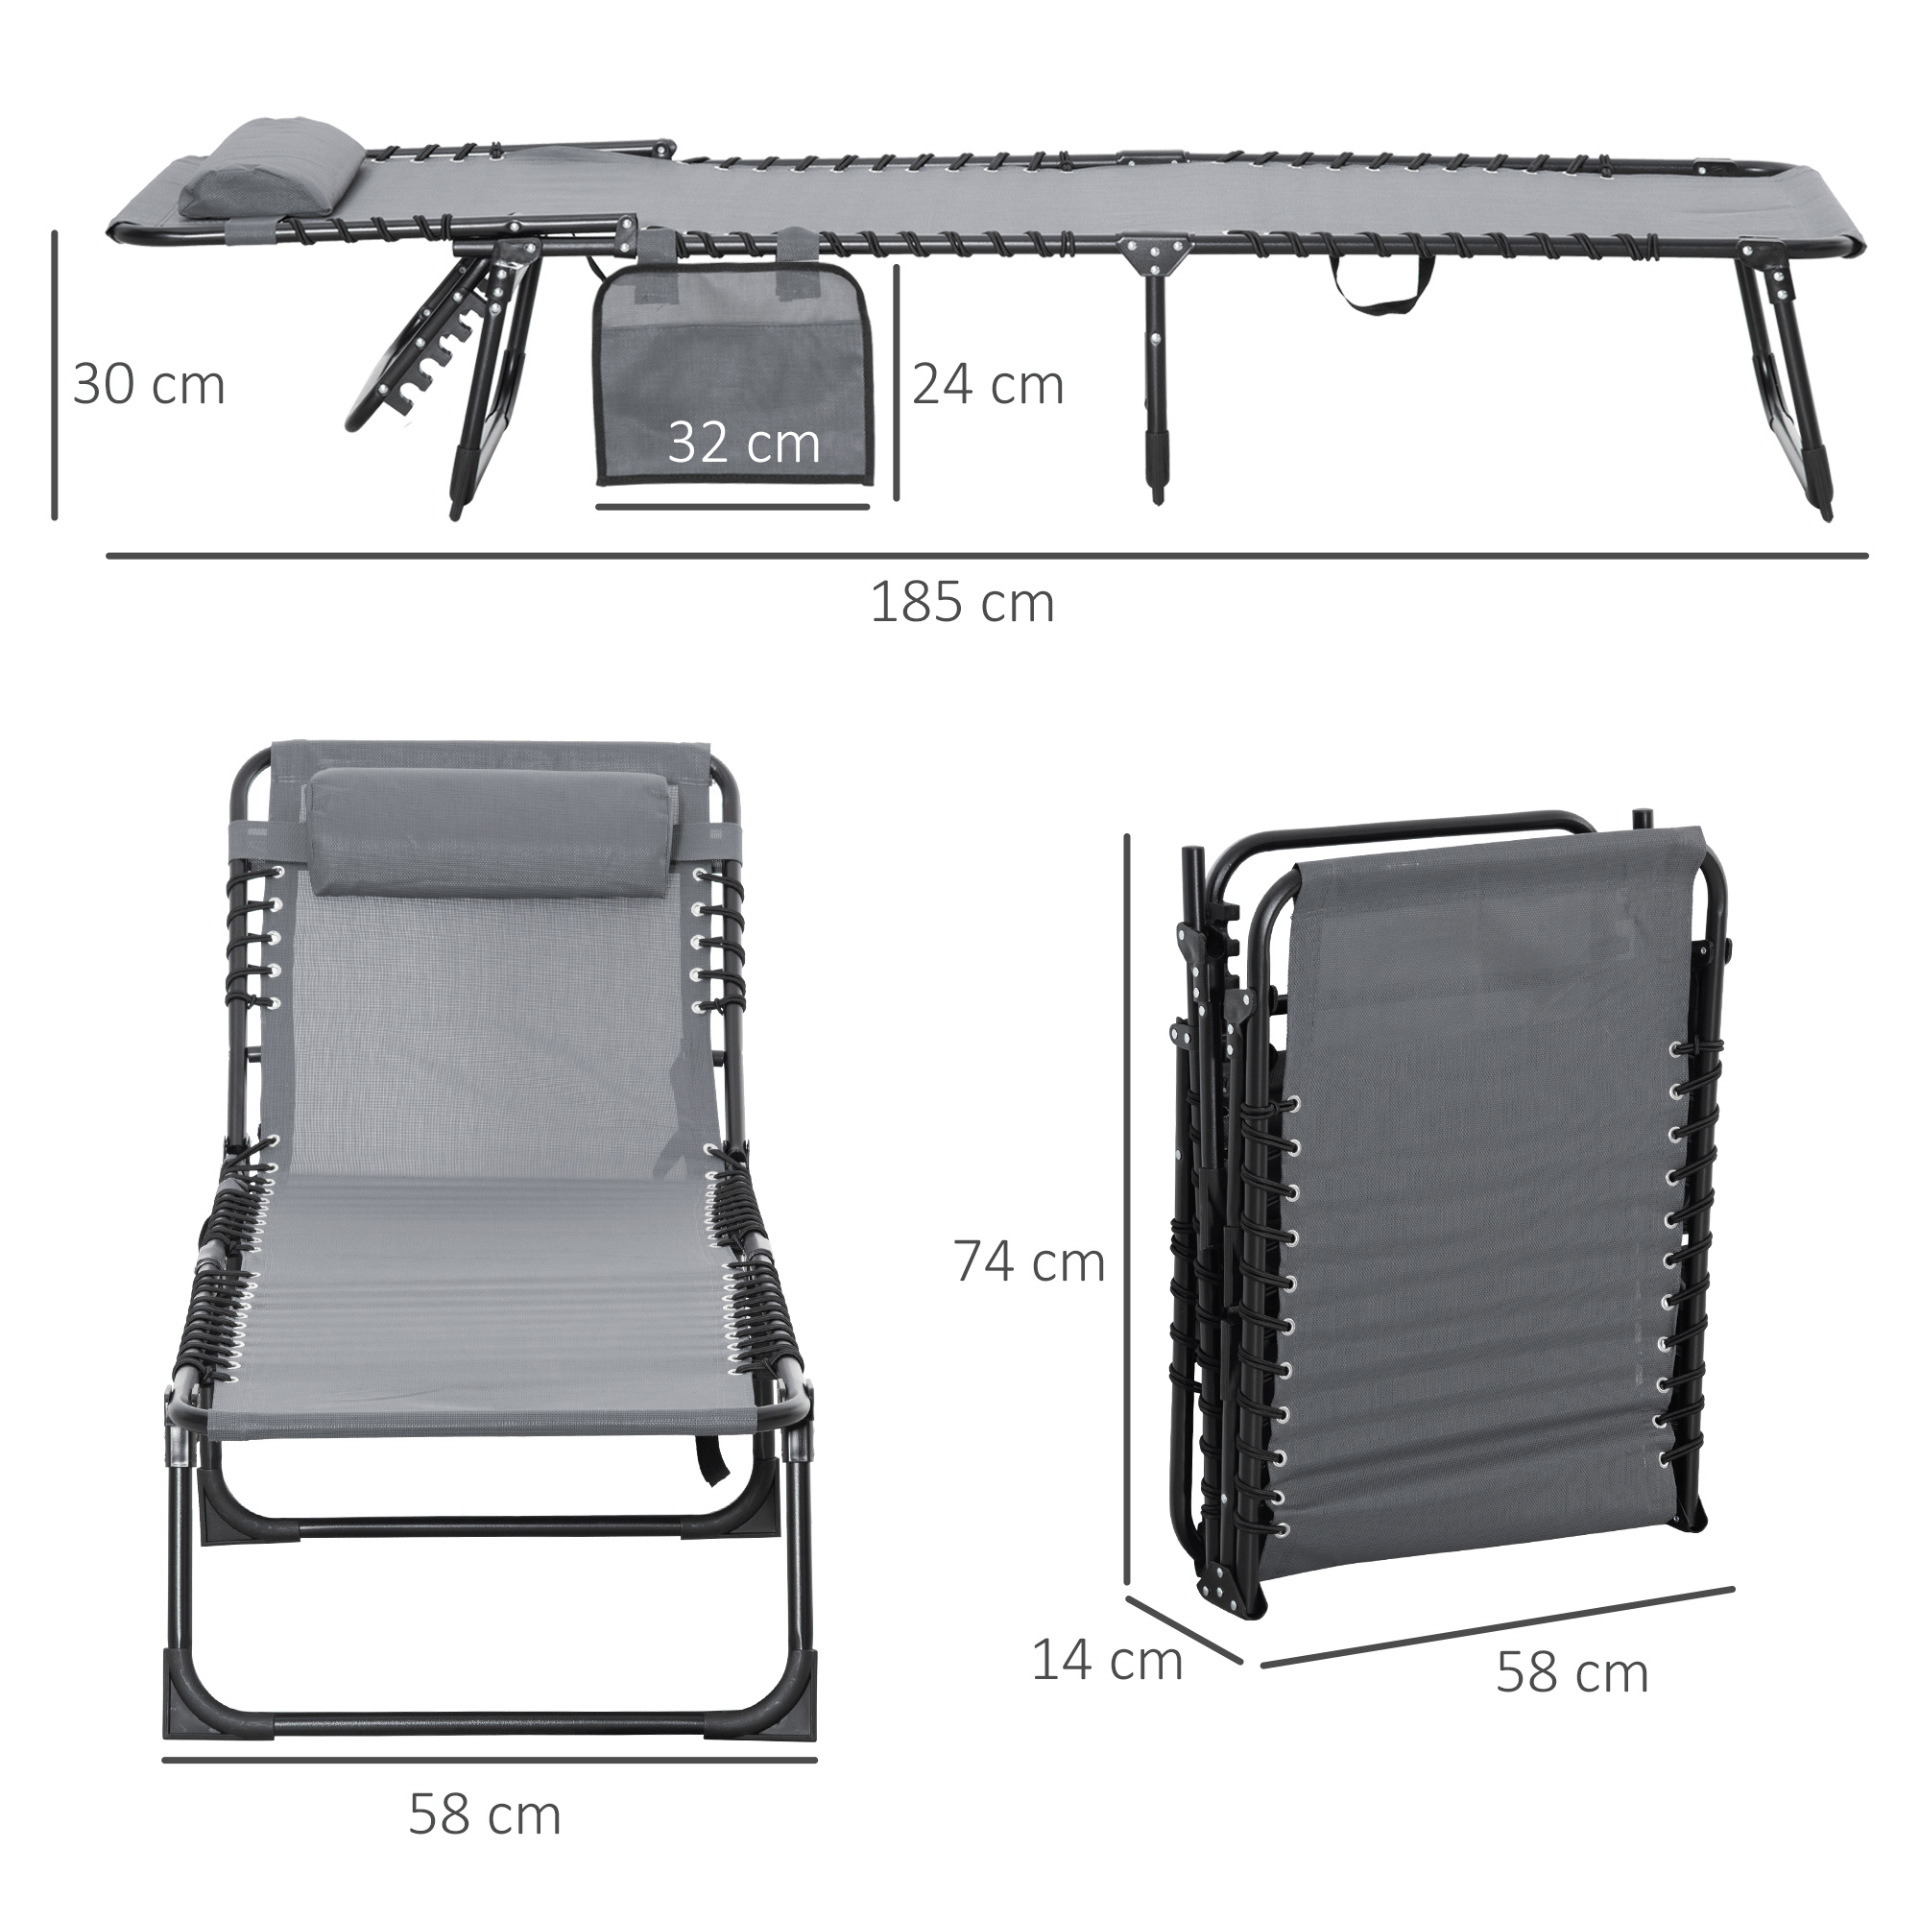 Outsunny Portable Sun Lounger, Folding Camping Bed Cot, Reclining Lounge Chair - Grey Camping Chair Cosy Camping Co.   